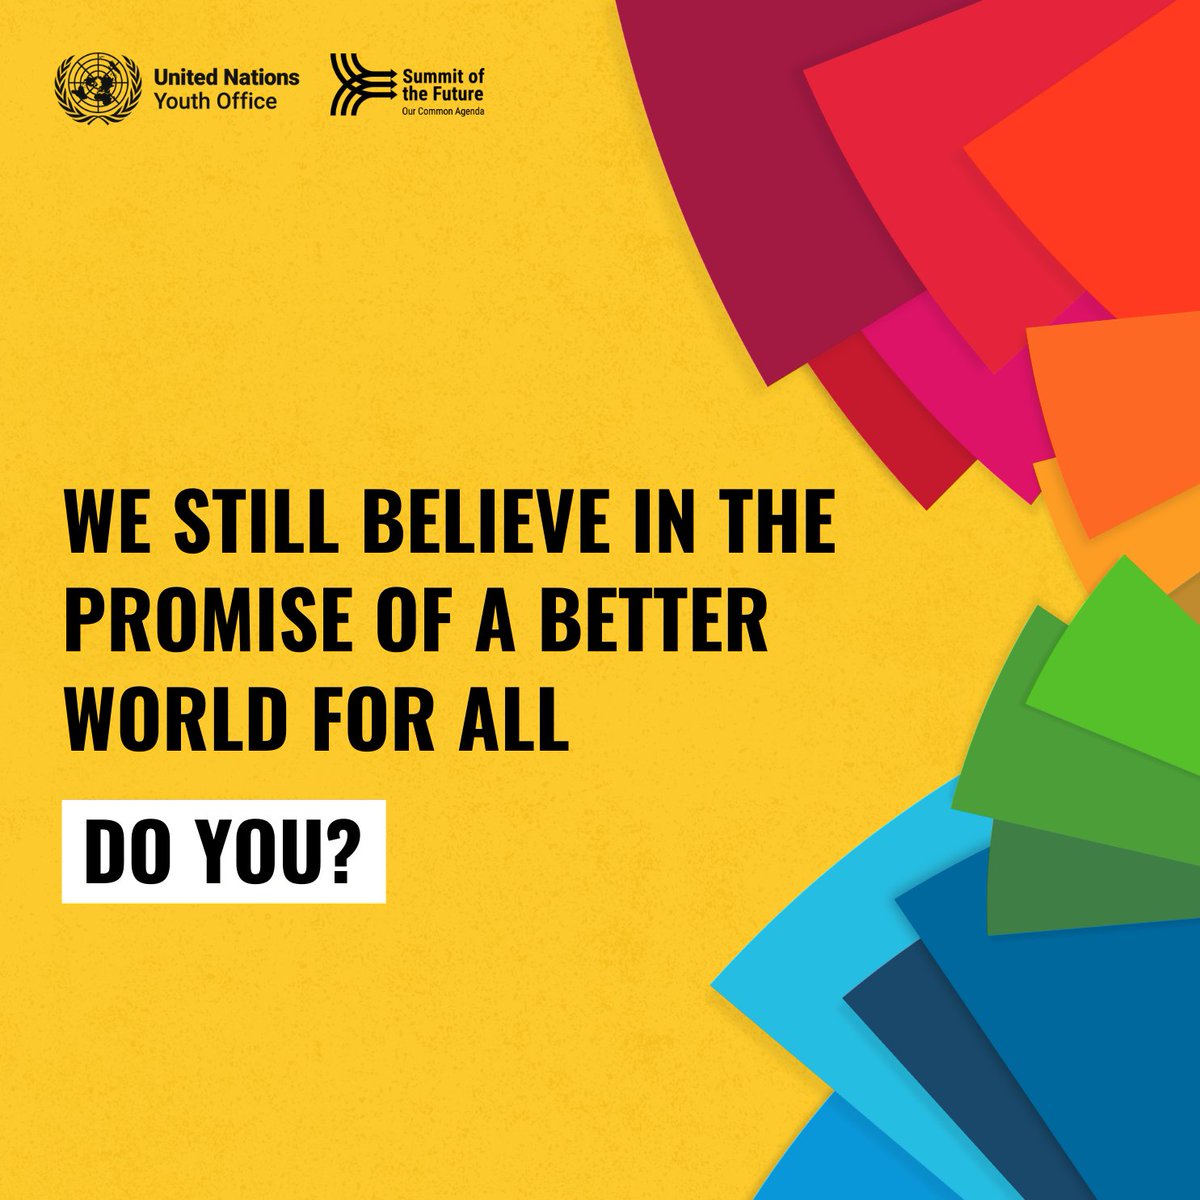 In facing our global challenges, @UNYouthAffairs is rallying young people and their allies to demand bold action from world leaders to make urgent and inclusive change. It’s time to speak up and let #YouthLead. Sign the open letter ⬇️ forms.office.com/pages/response…